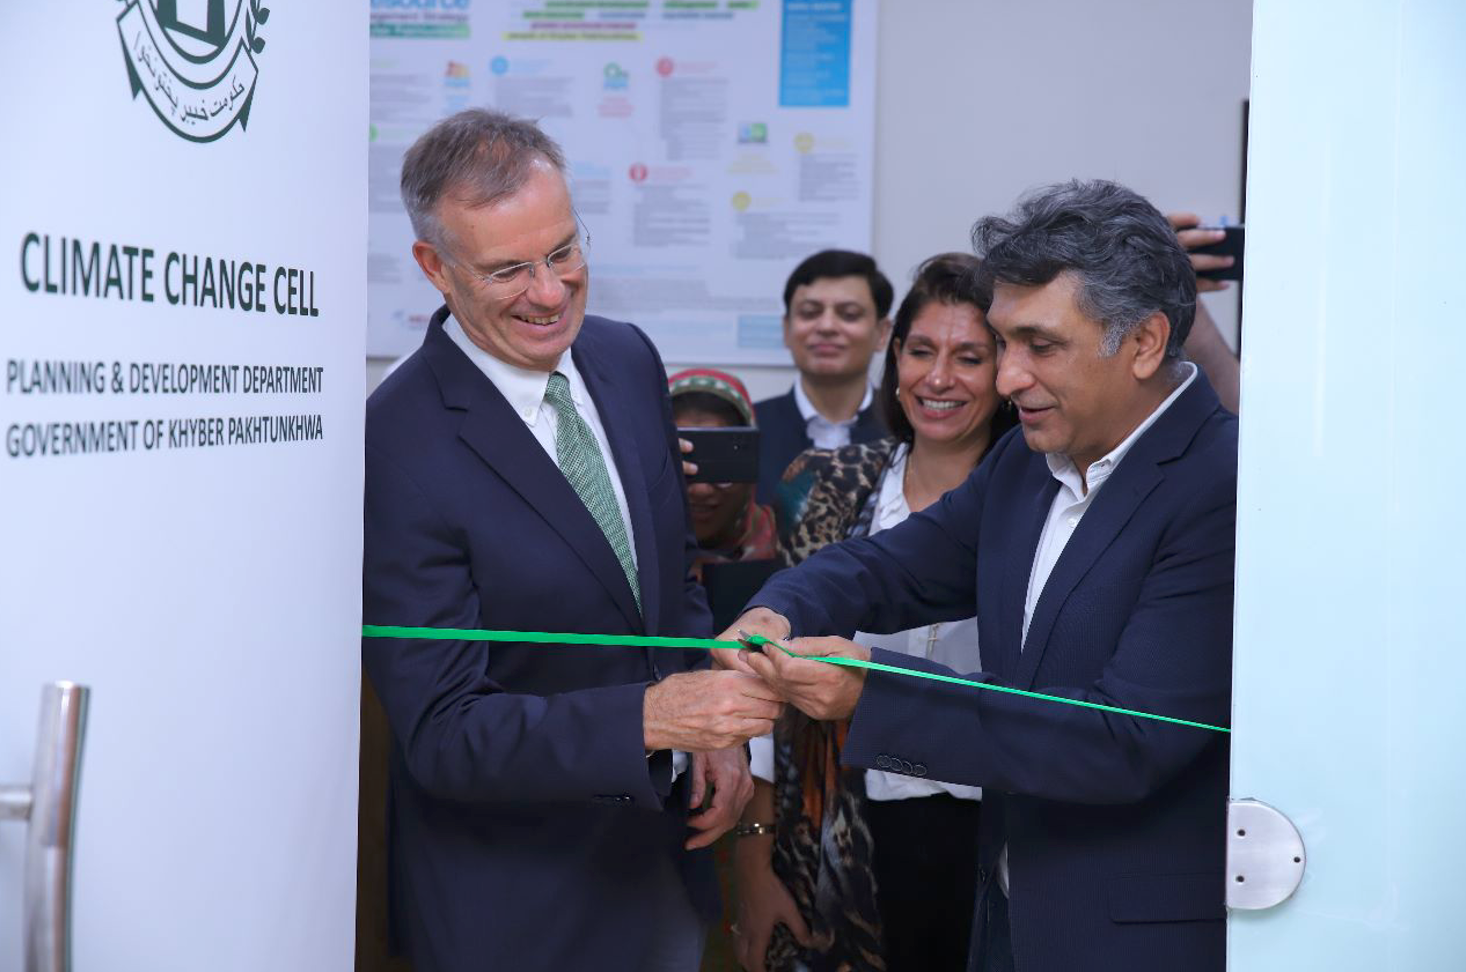 Launch of cell attended by German Ambassador to Pakistan and ECCC Coordinator